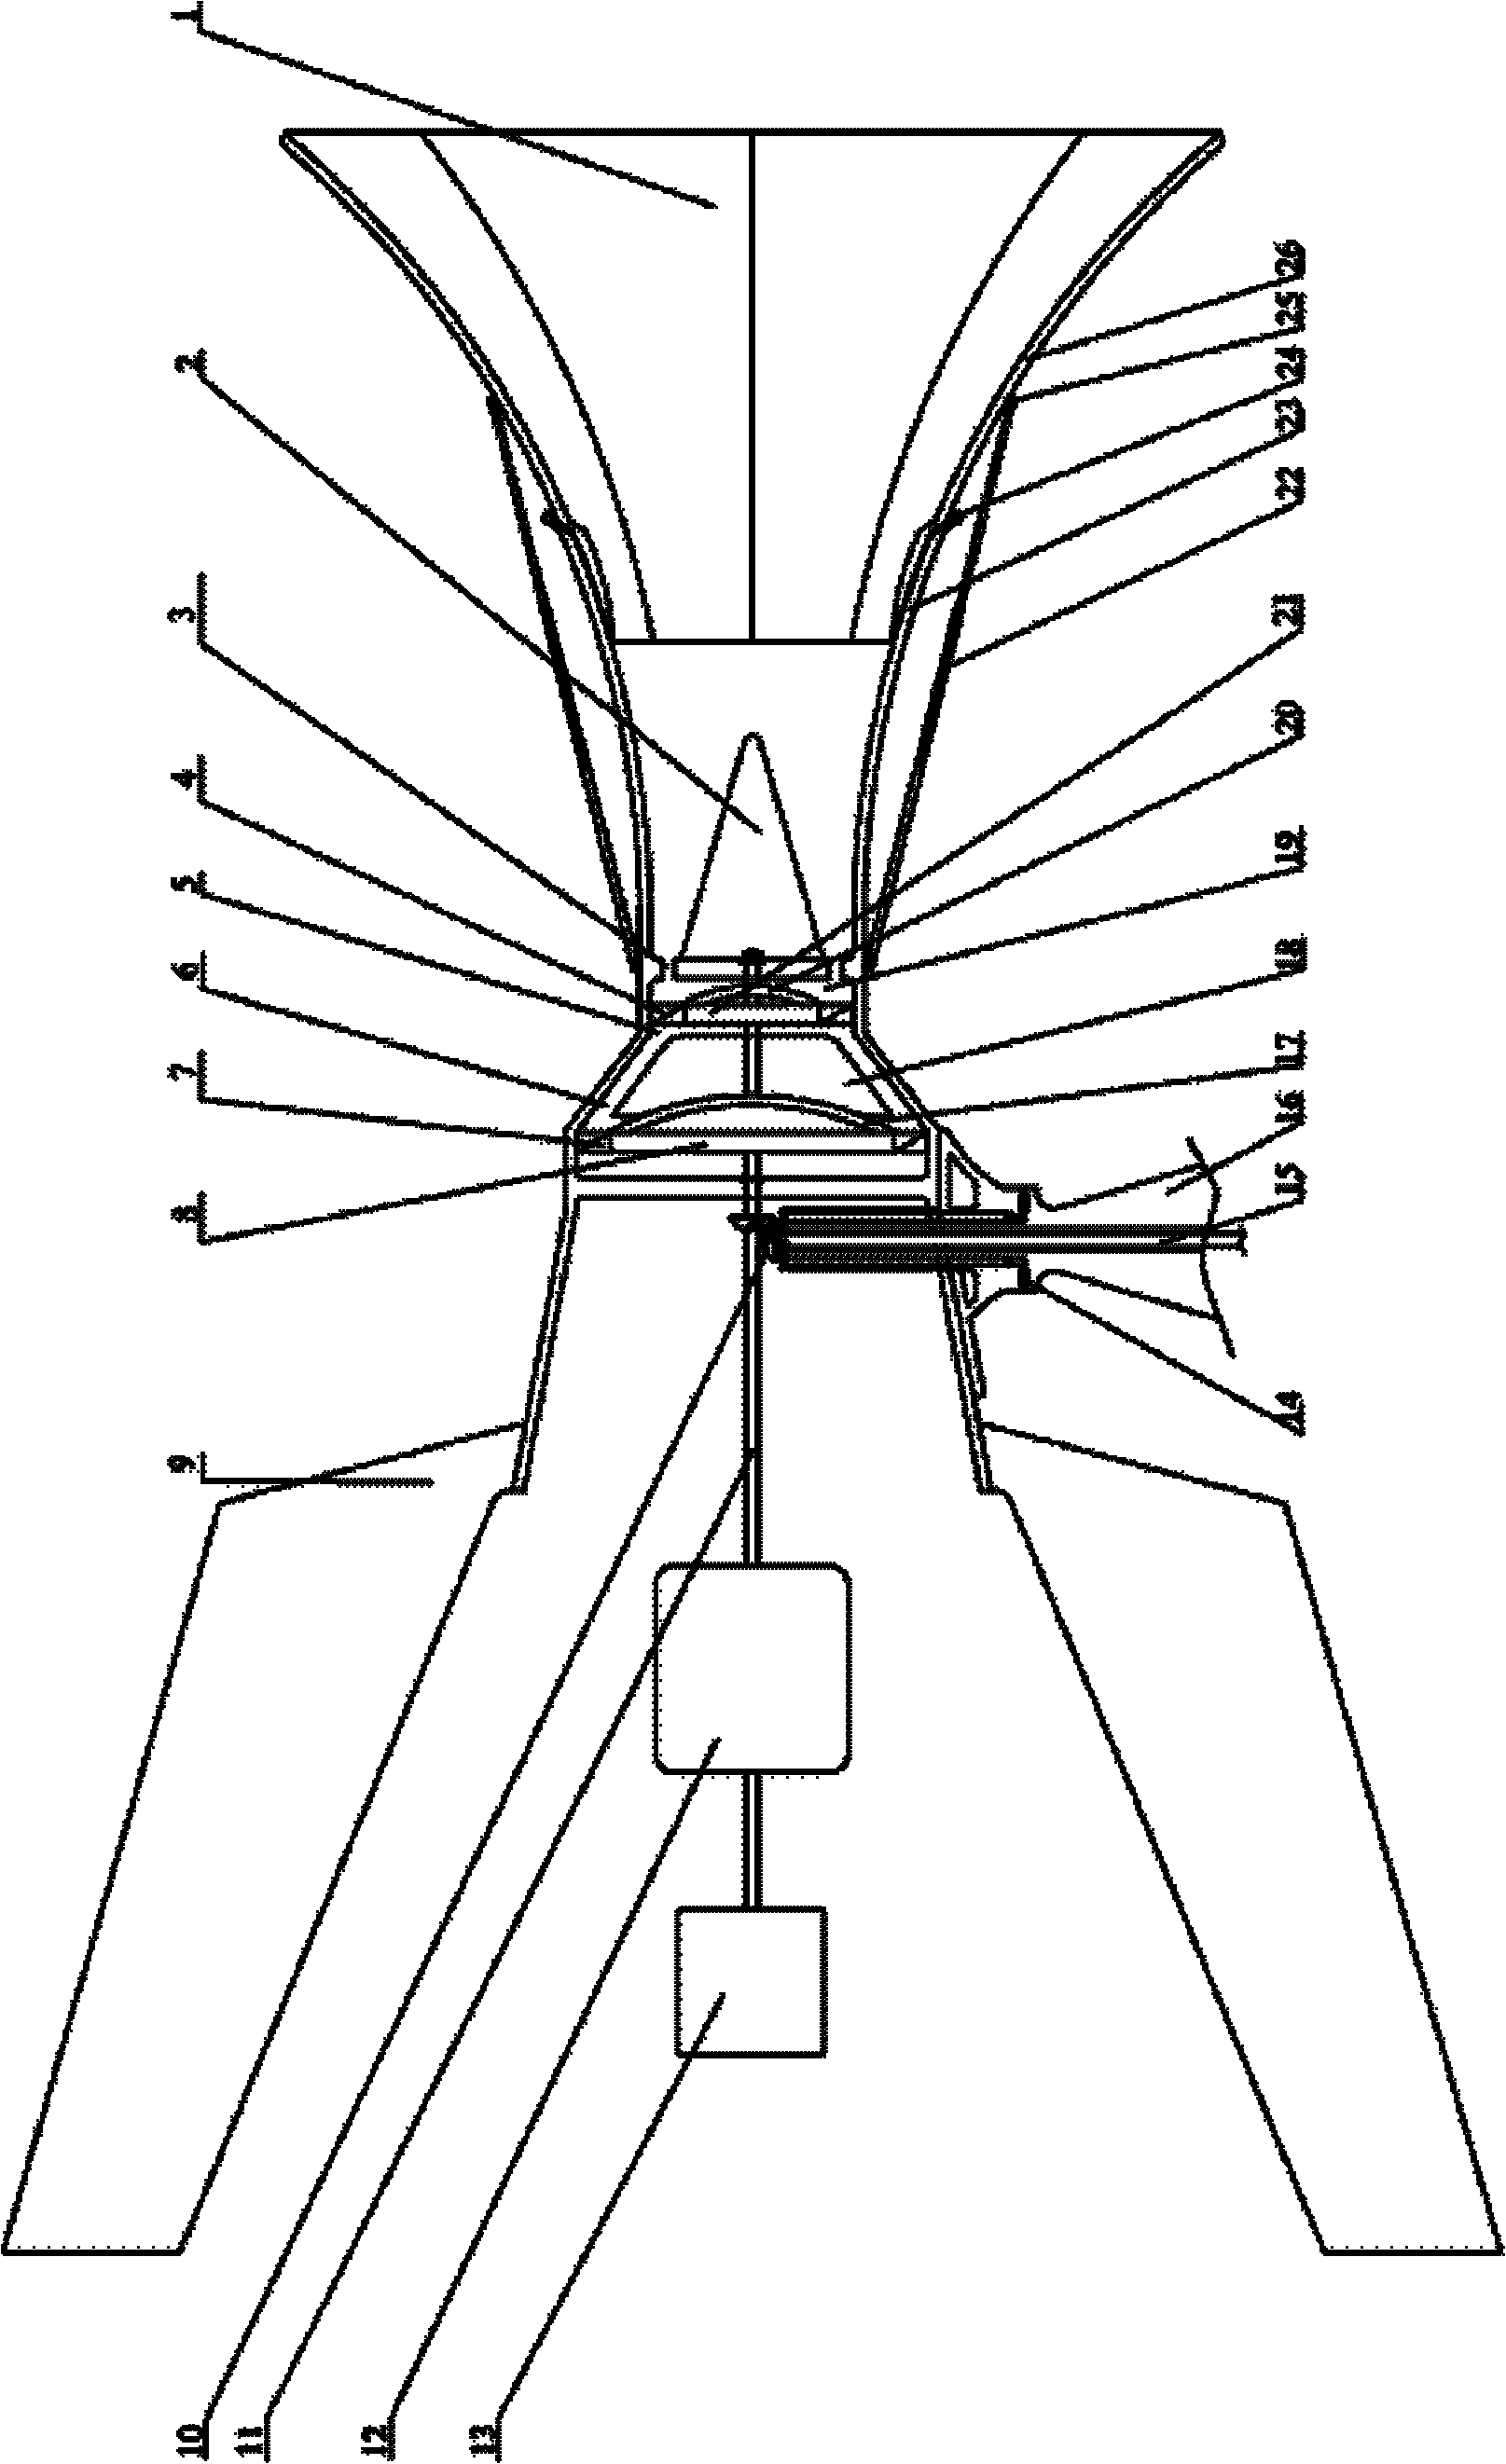 Air stream collecting device, wind motor and wind energy collecting device